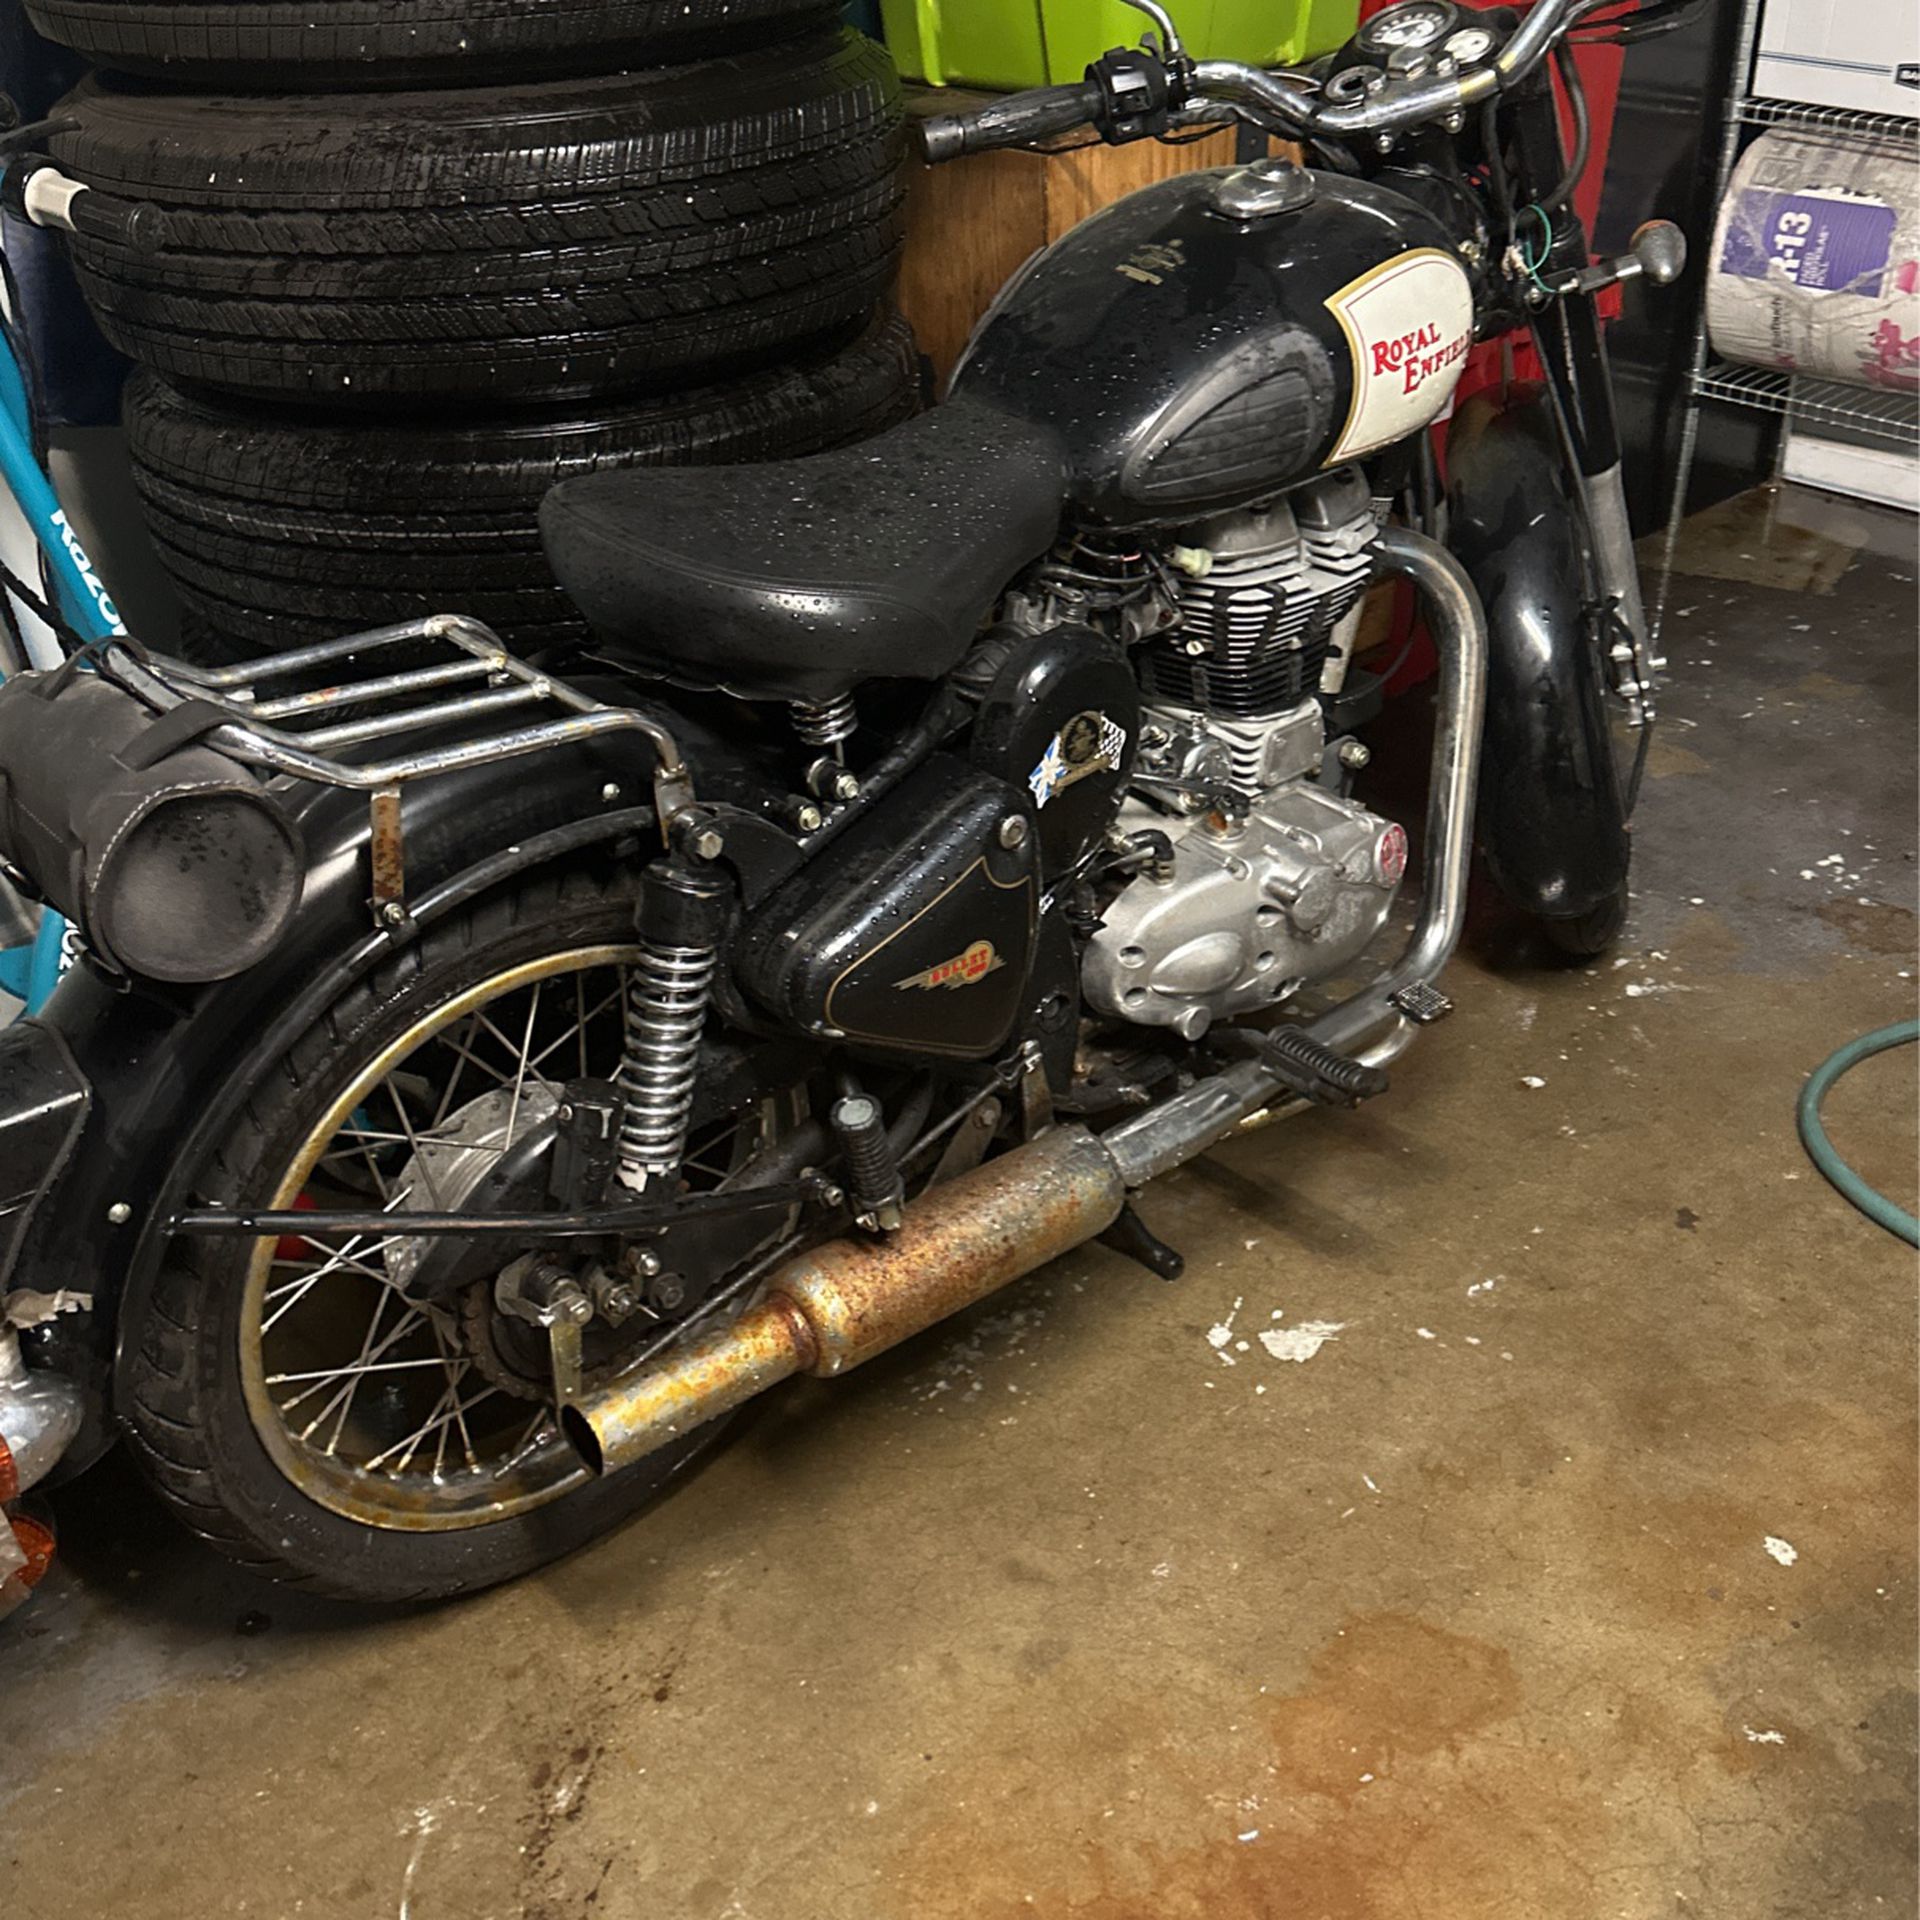 Royal Enfield 2010  $2k  Parts Only